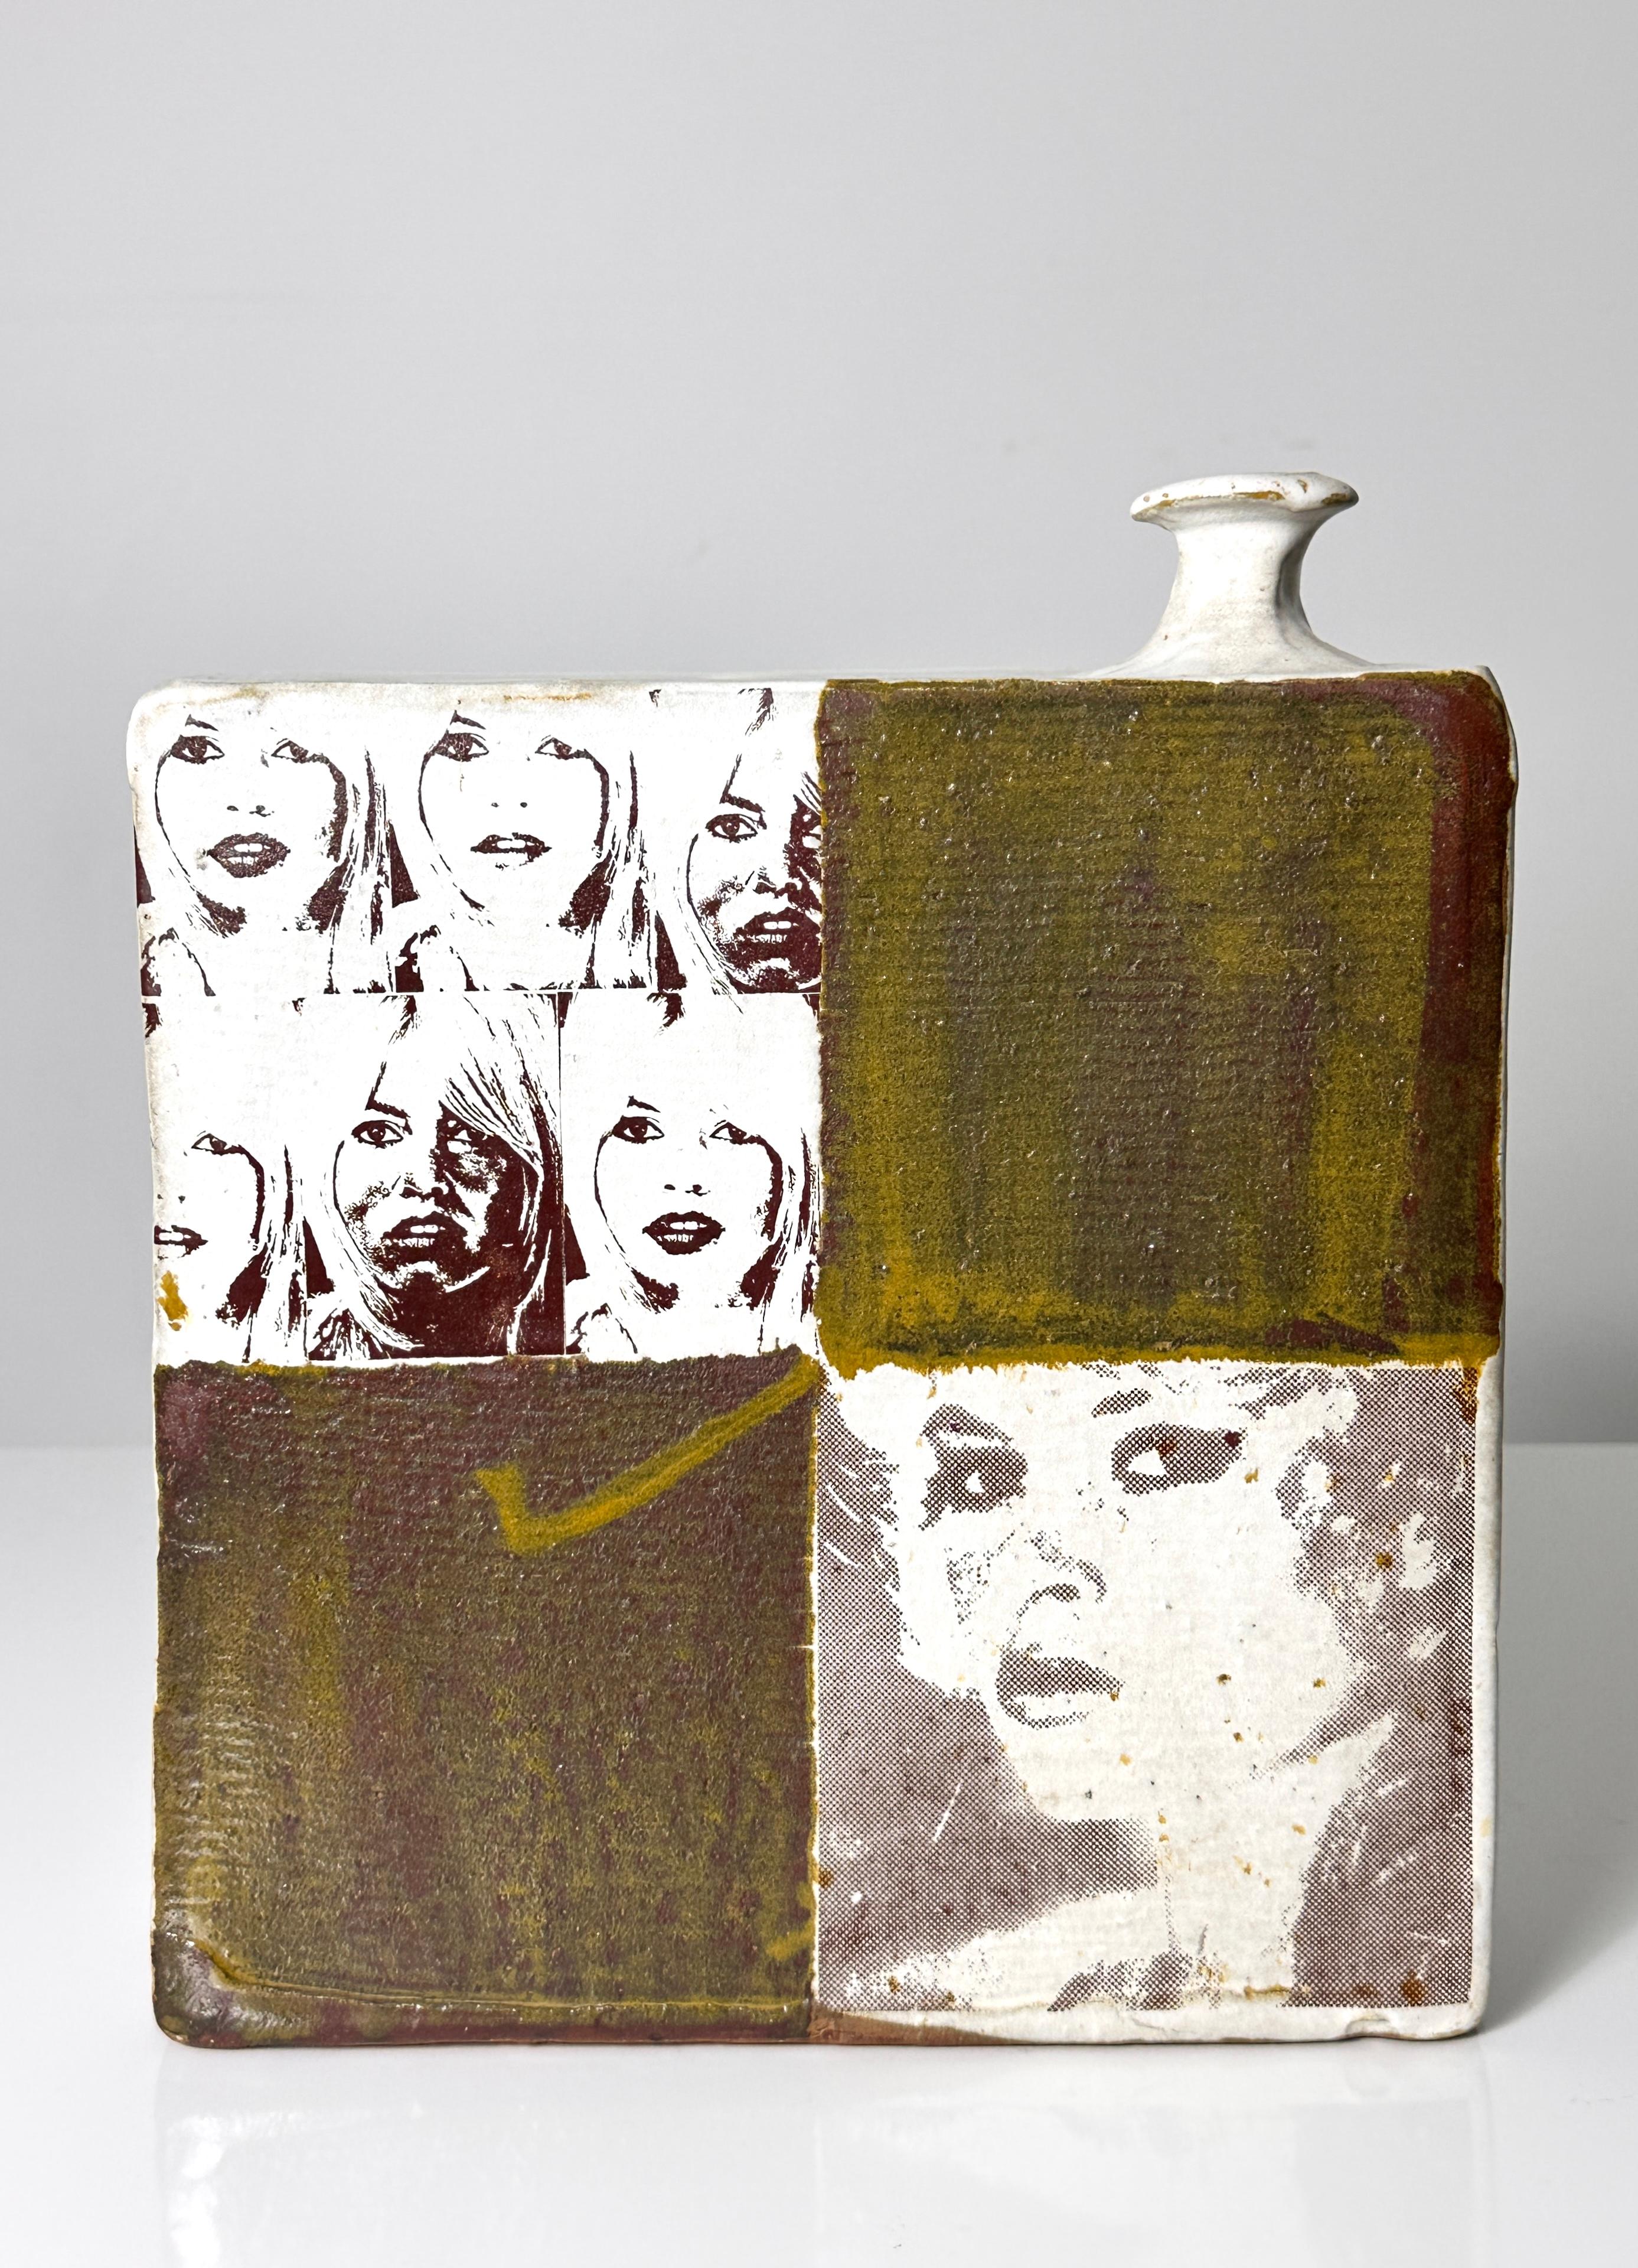 Stoneware vessel by Robert Engle circa 1960s
Square form with Bridgette Bardot photographic transfer and off center spout
An exceptional example of his work
Signed to underside